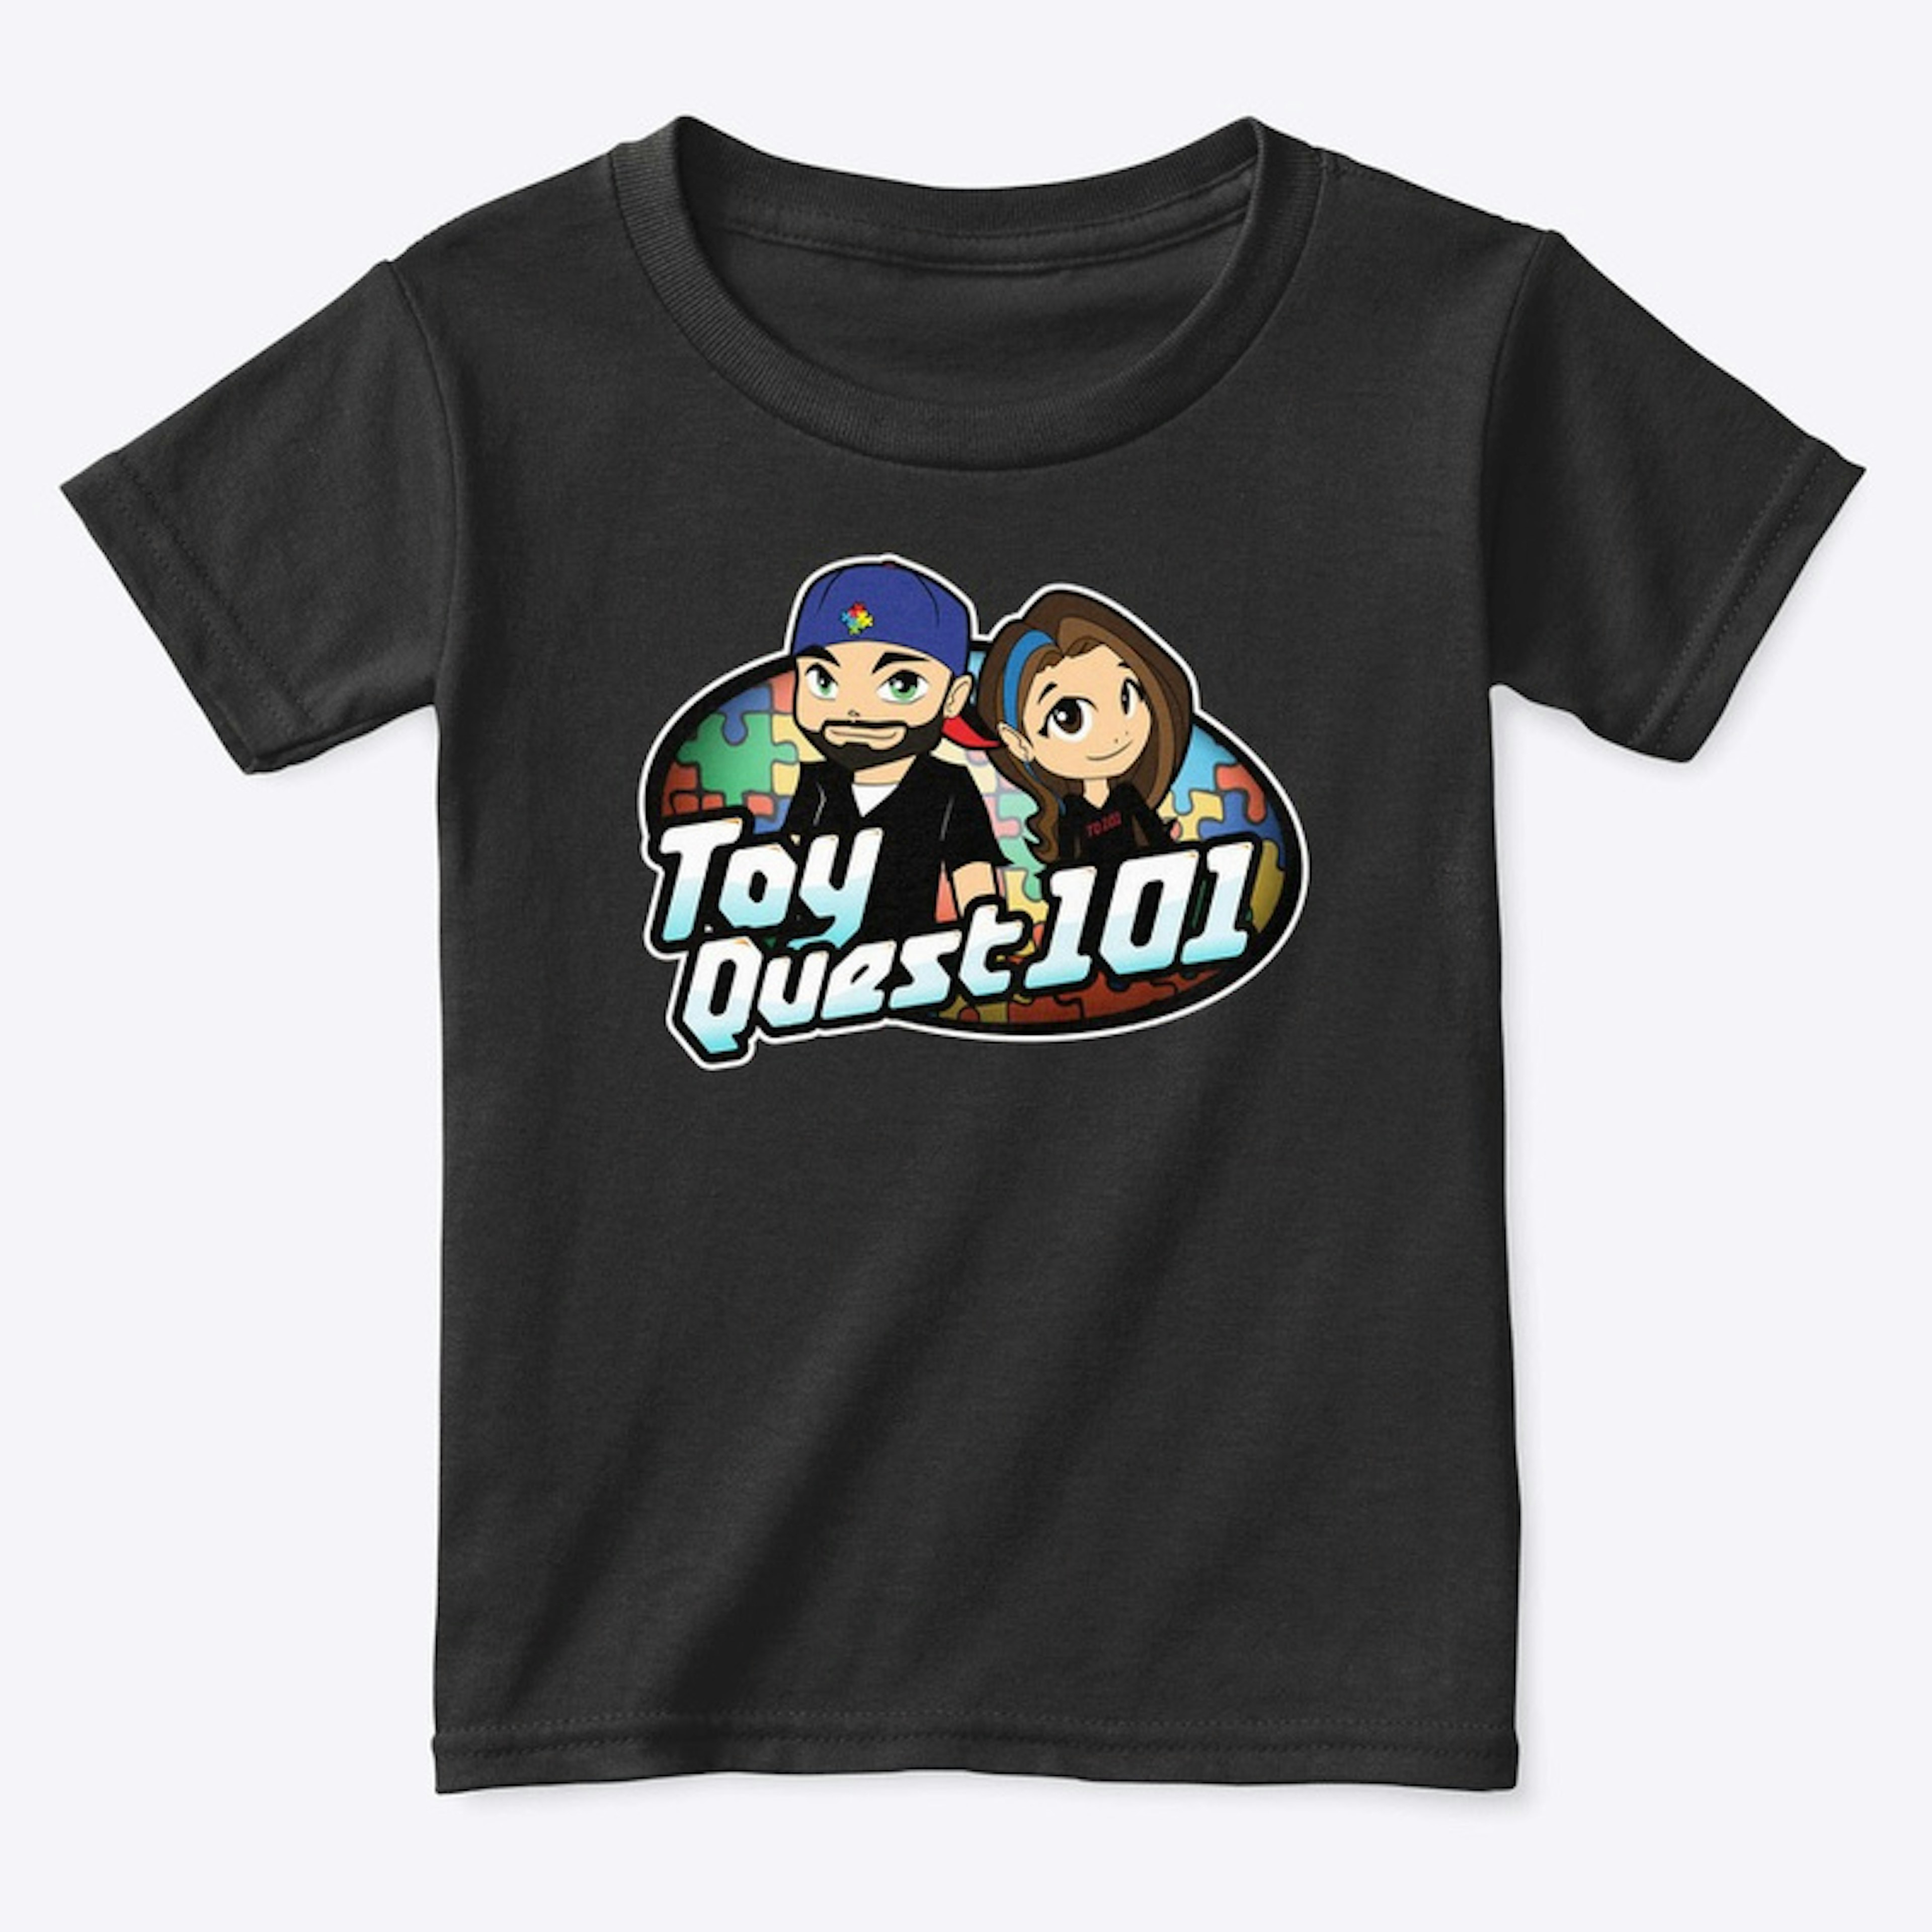 Toyquest101 BLK Toddler T-Shirt